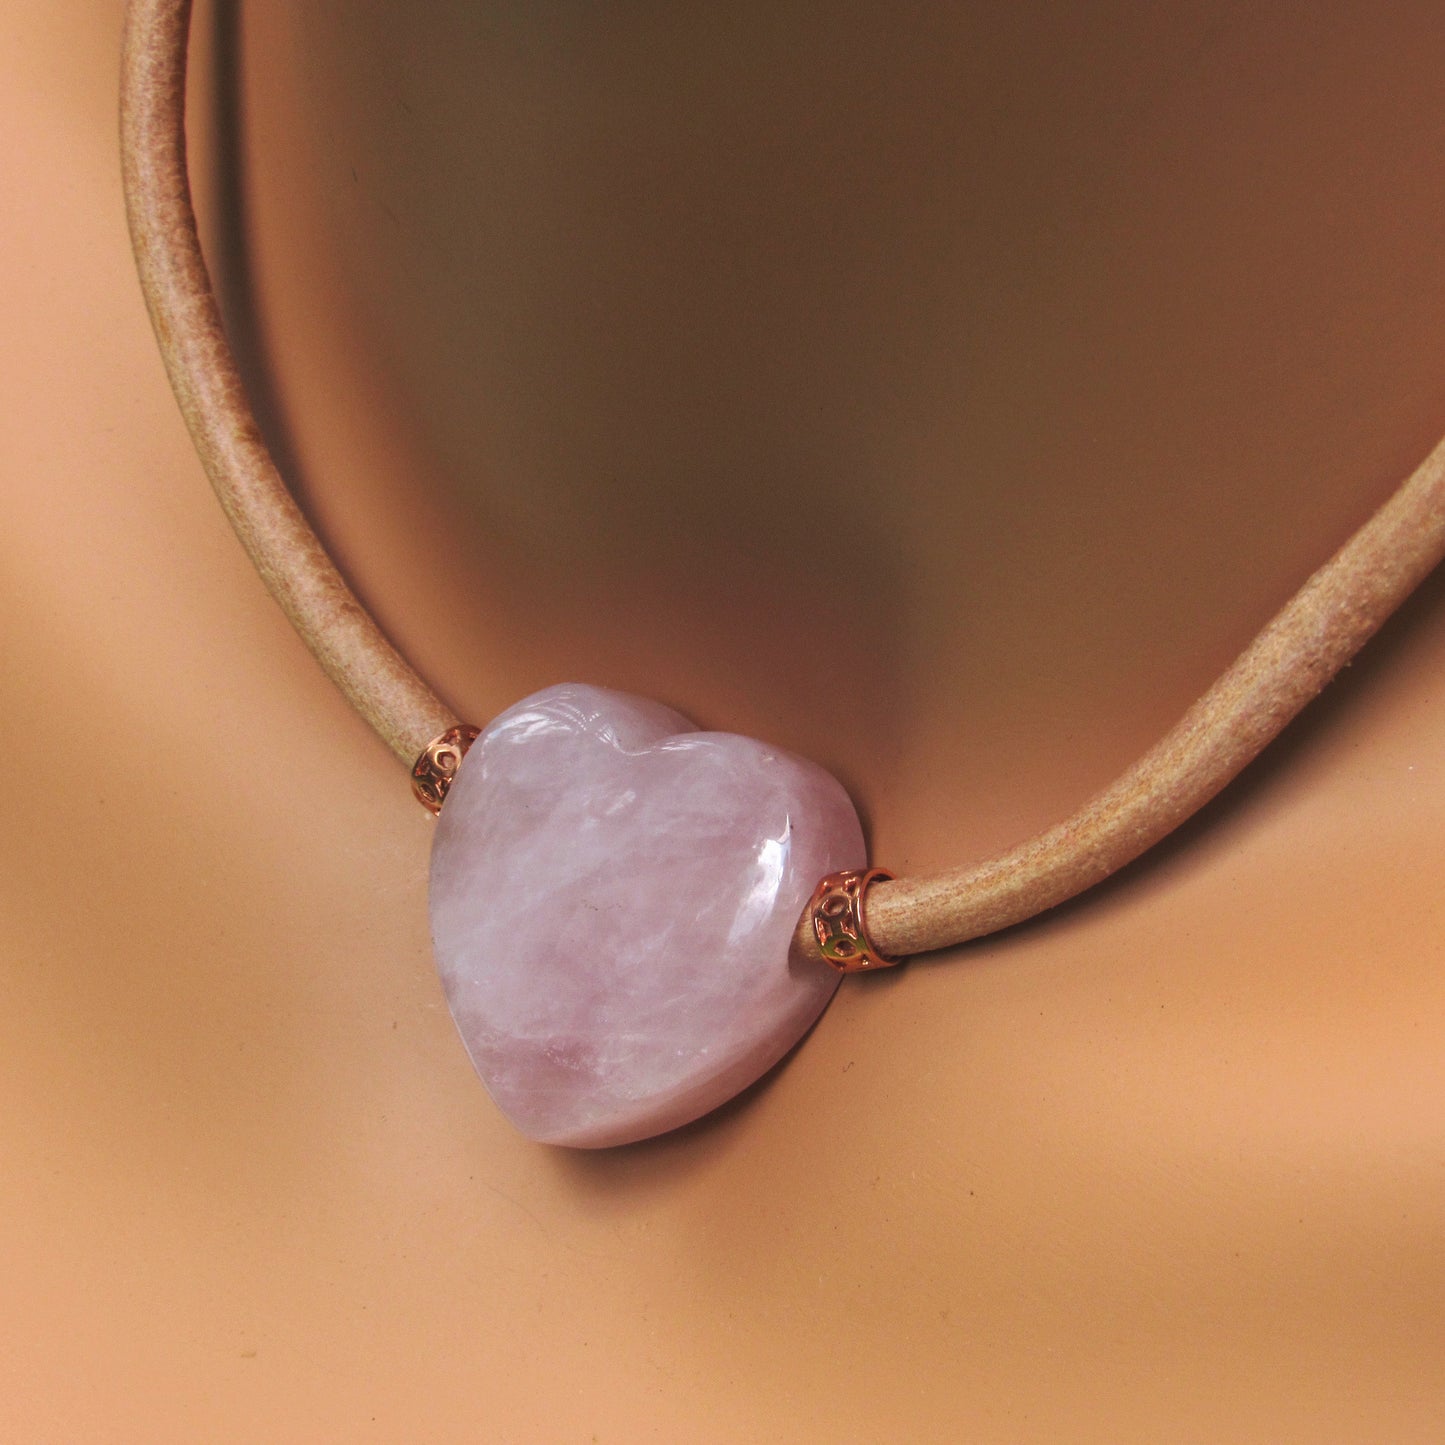 Rose Quartz gemstone heart and Copper on Natural Leather